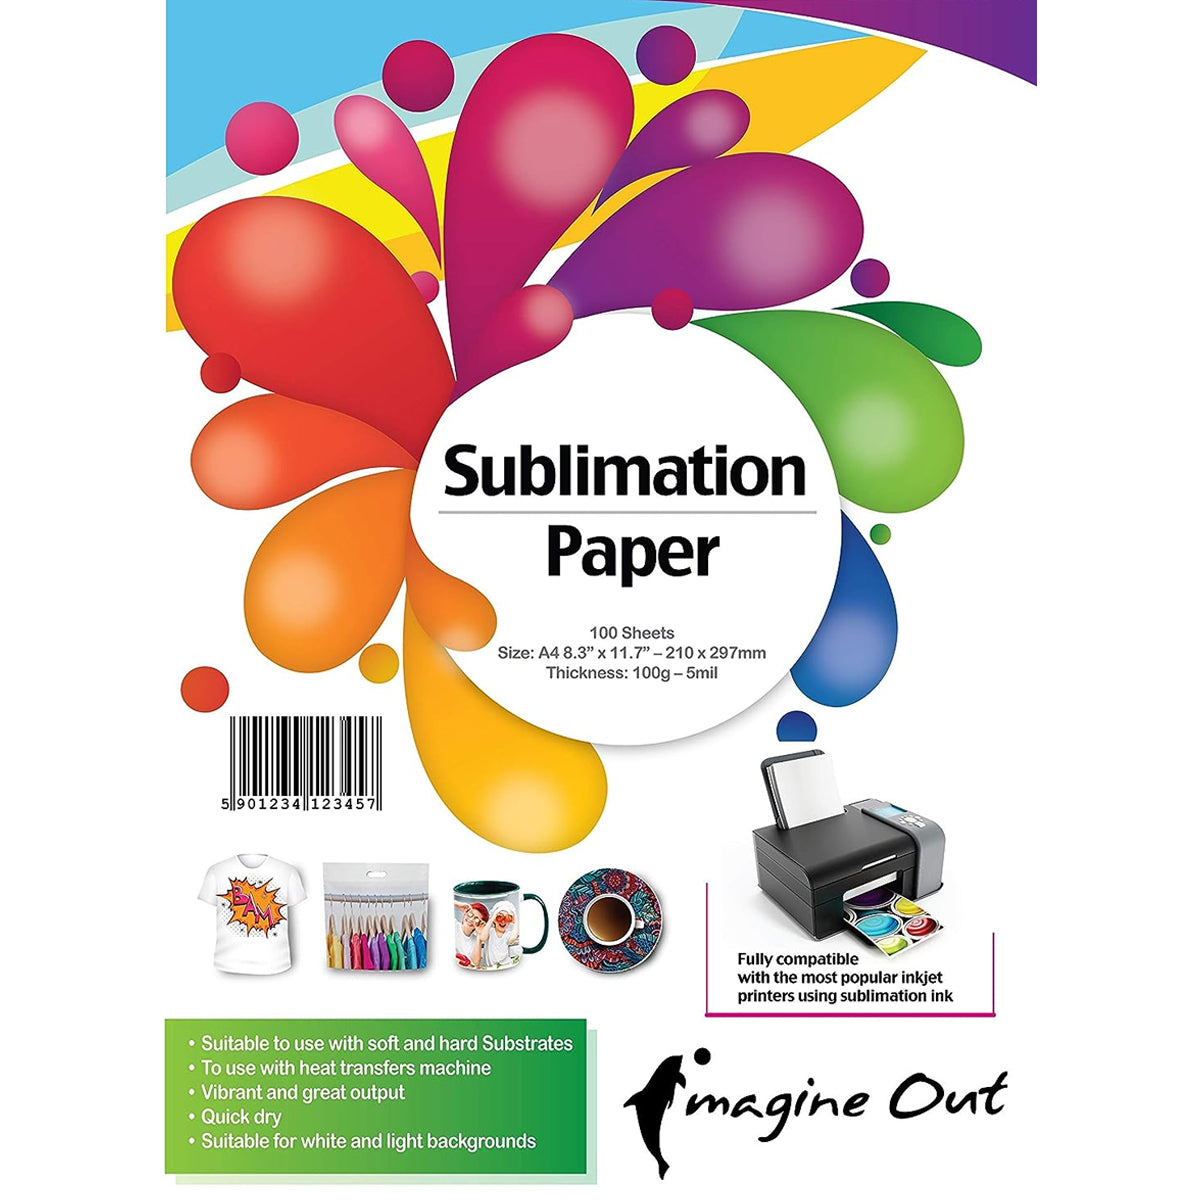 Sublimation Paper 100 Sheets for Inkjet Printer with Sublimation